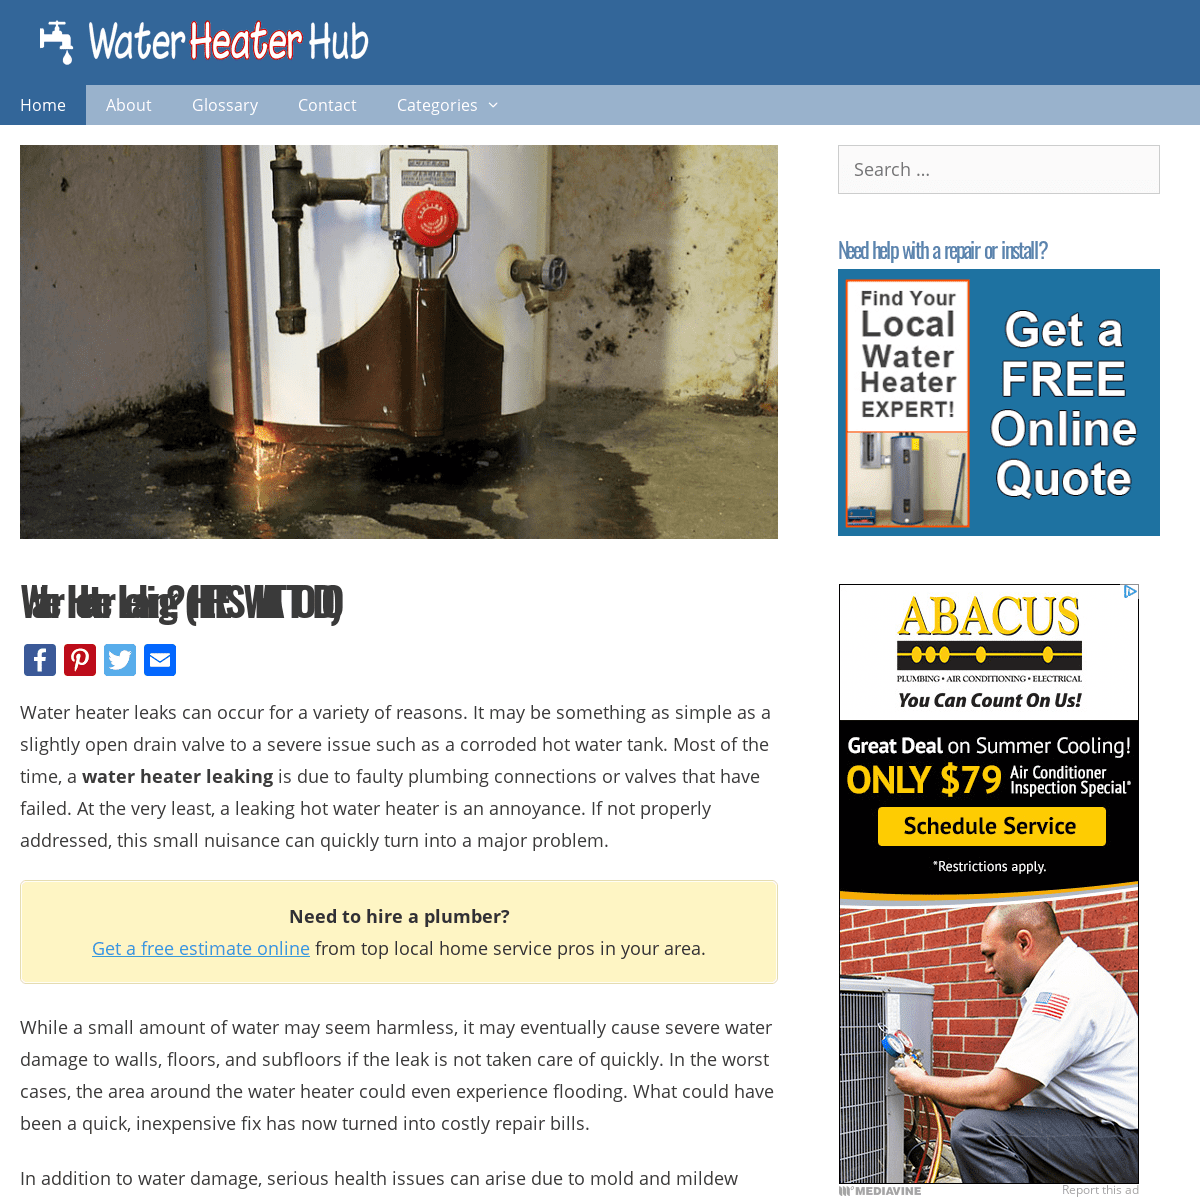 Water Heater Leaking? (HERE'S WHAT TO DO) | Water Heater Hub